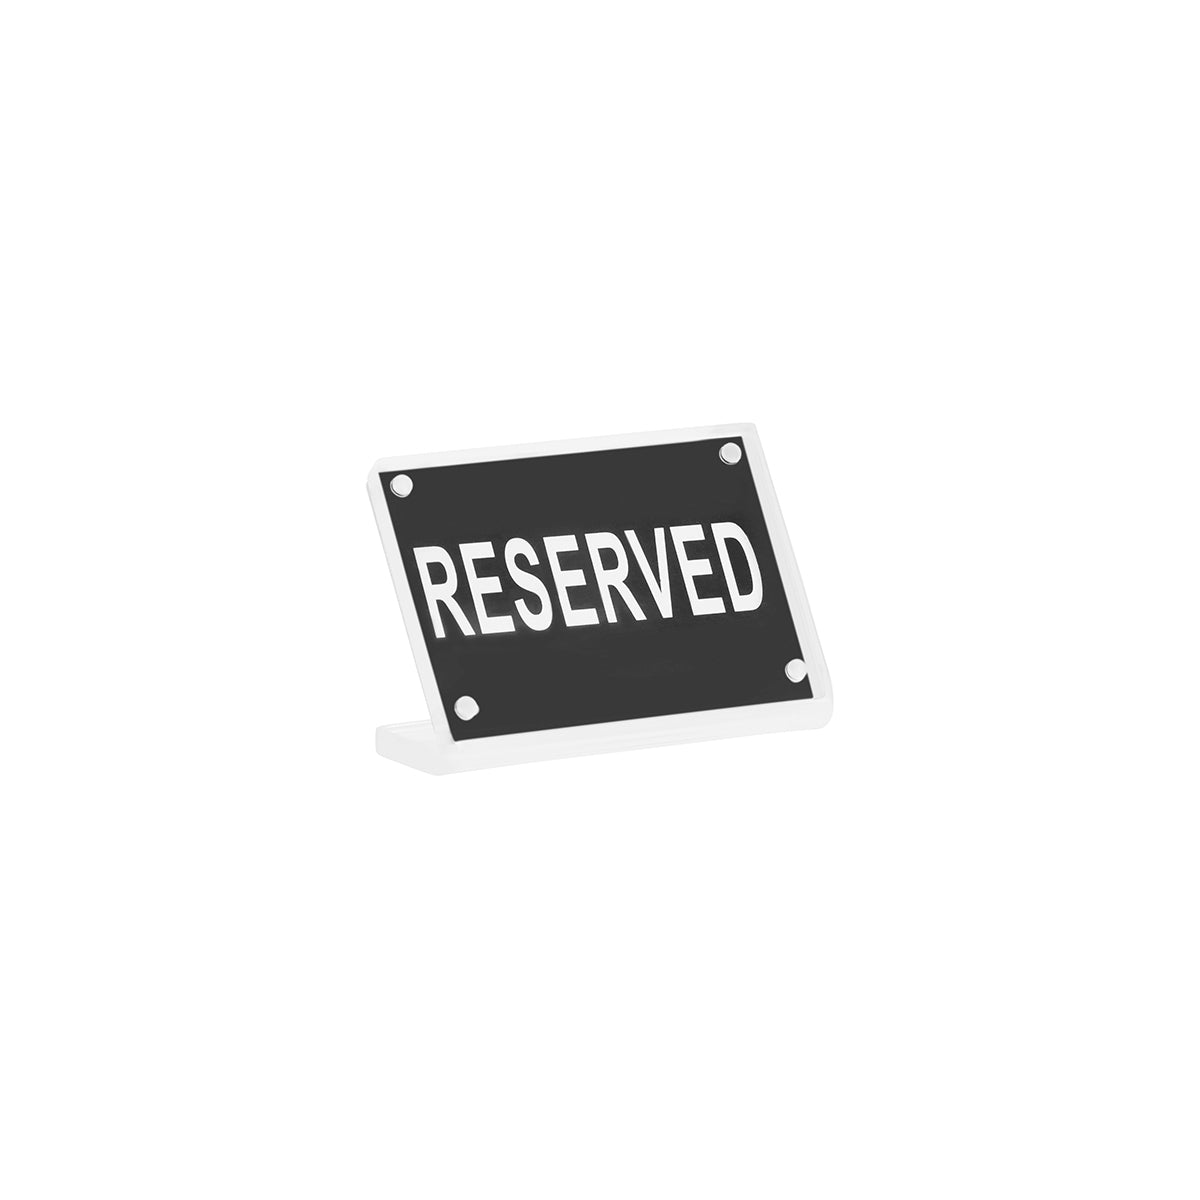 81300 Chef Inox Buffet Sign Acrylic with Magnet Plate - Reserved Tomkin Australia Hospitality Supplies